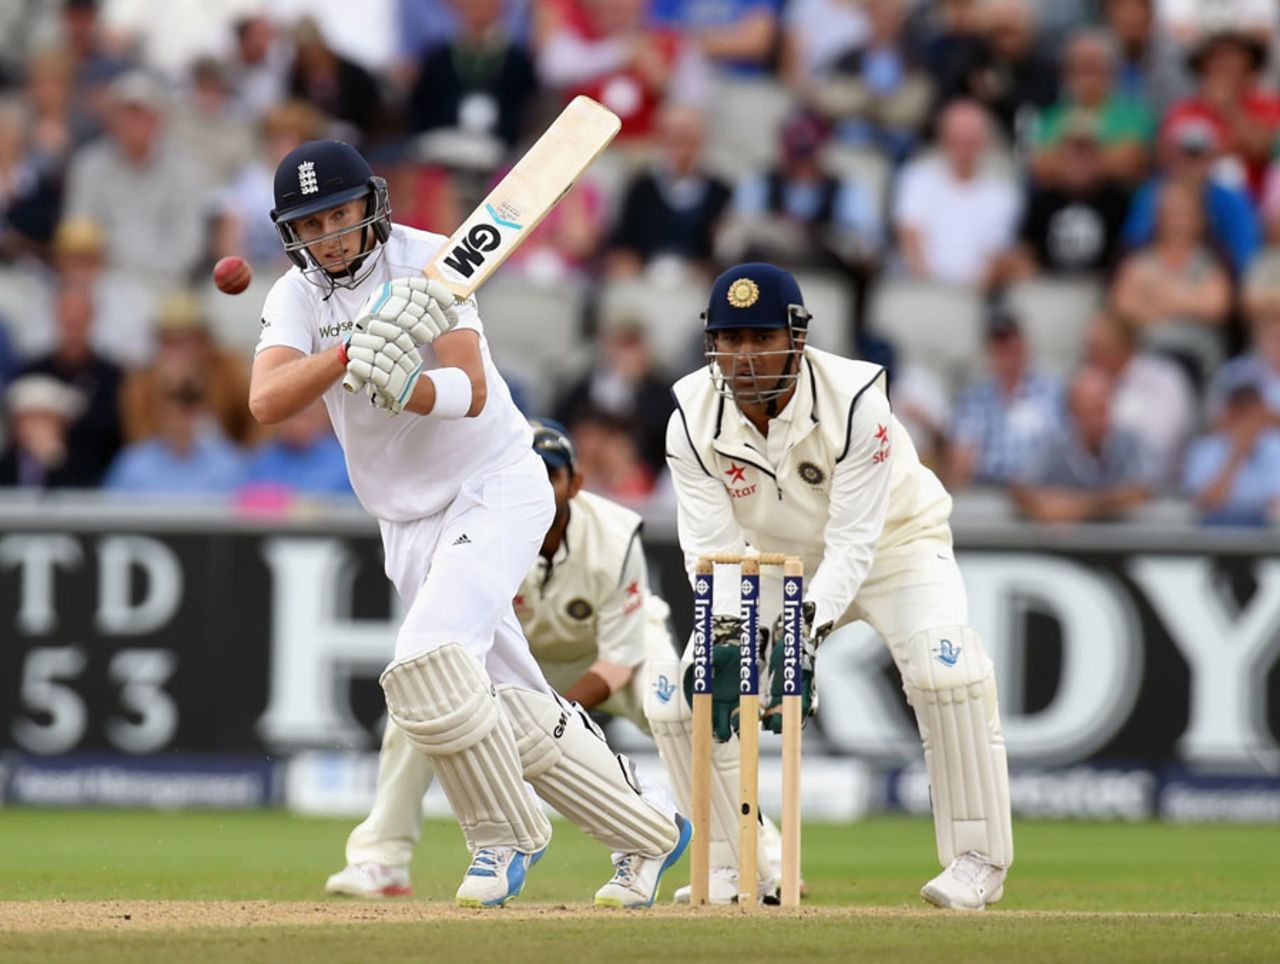 Joe Root collects some runs, England v India, 4th Test, Old Trafford, 2nd day, August 8, 2014